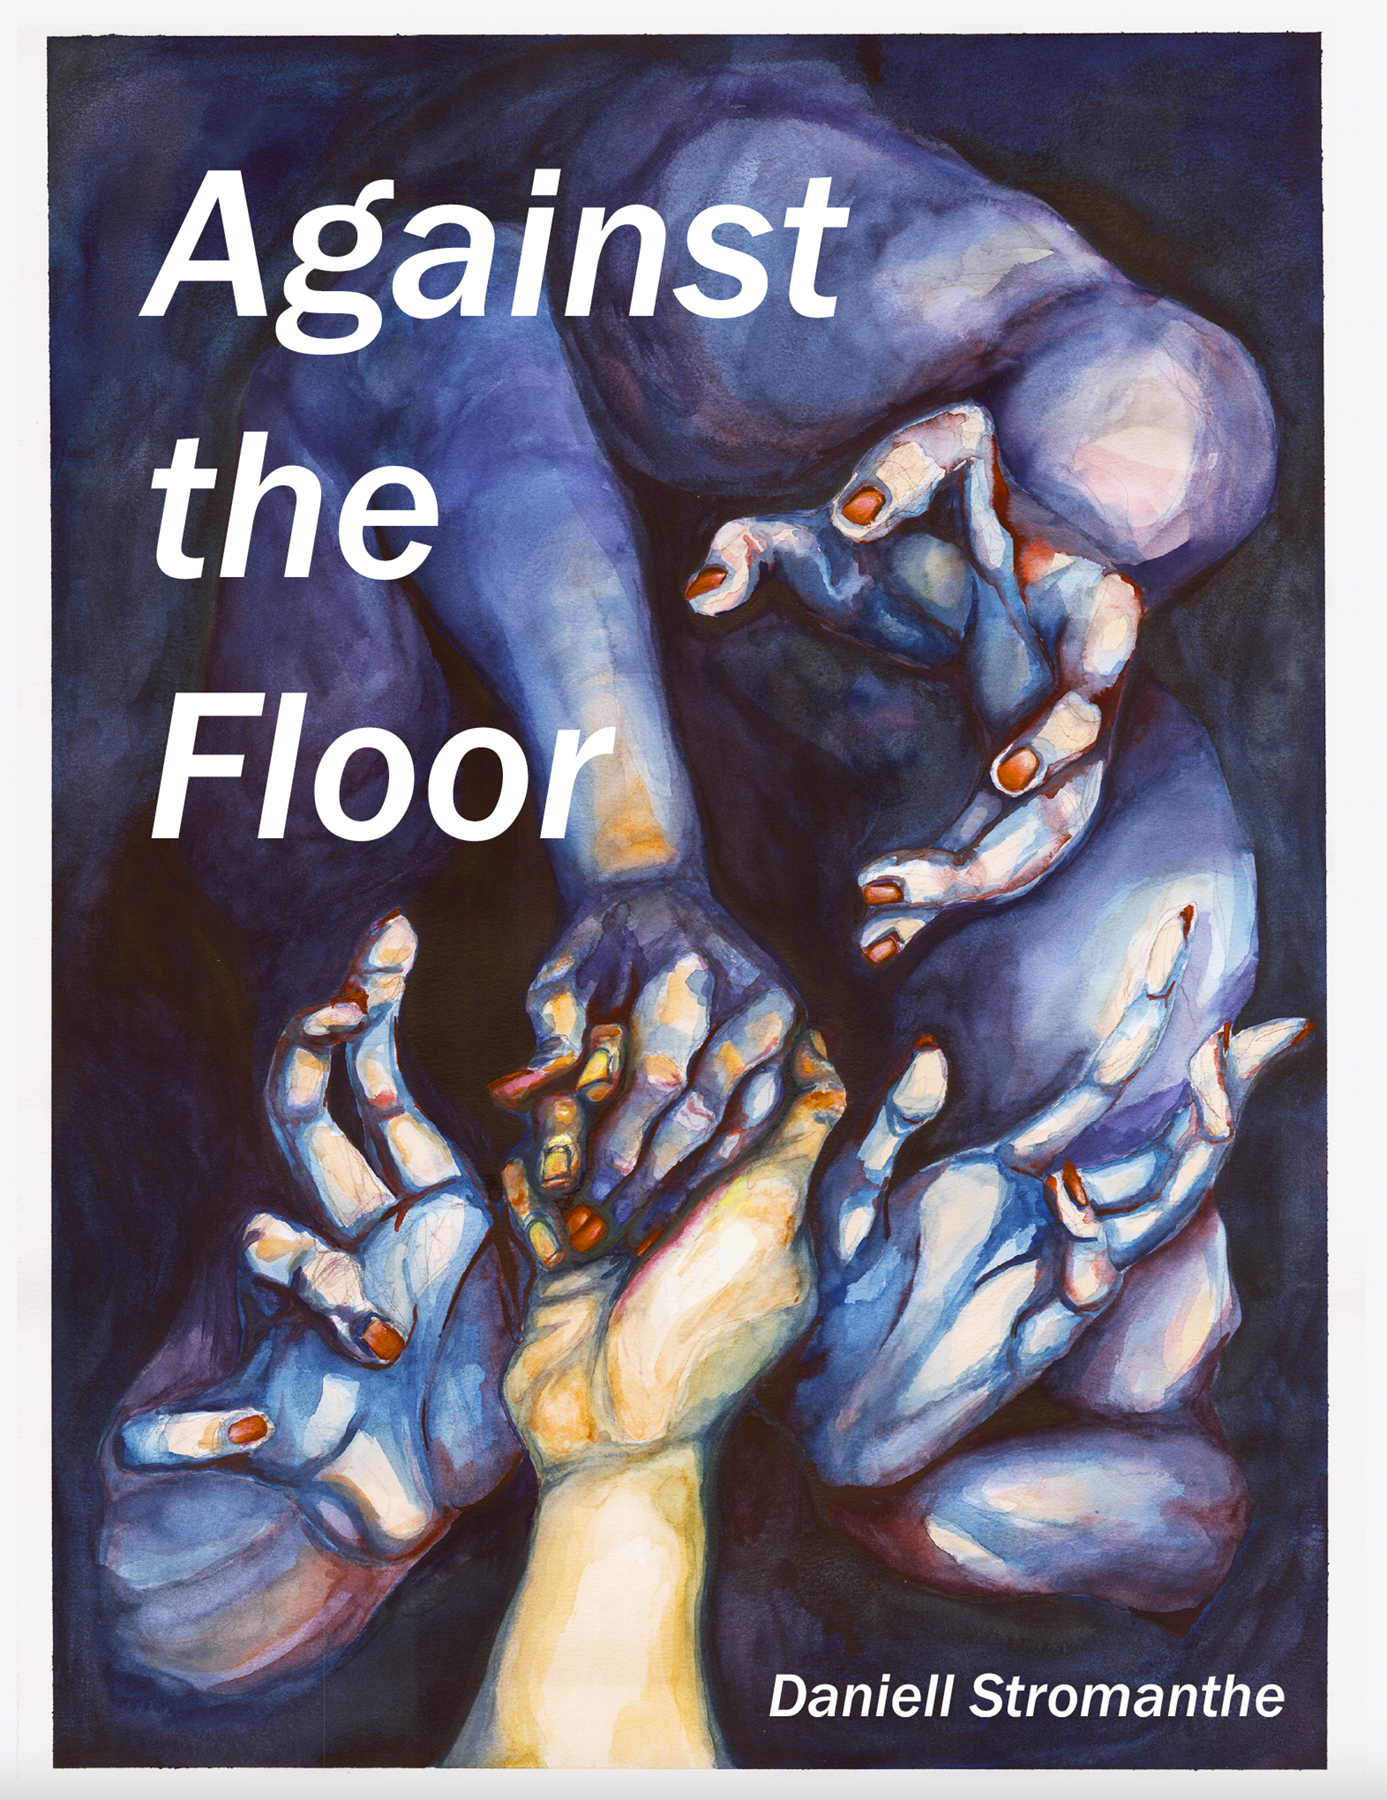 Cover of "Against the Floor" using the image "Sorry I've Only One Hand I'm Pulling As Hard As I Can." Image courtesy of Daniell Stromanthe